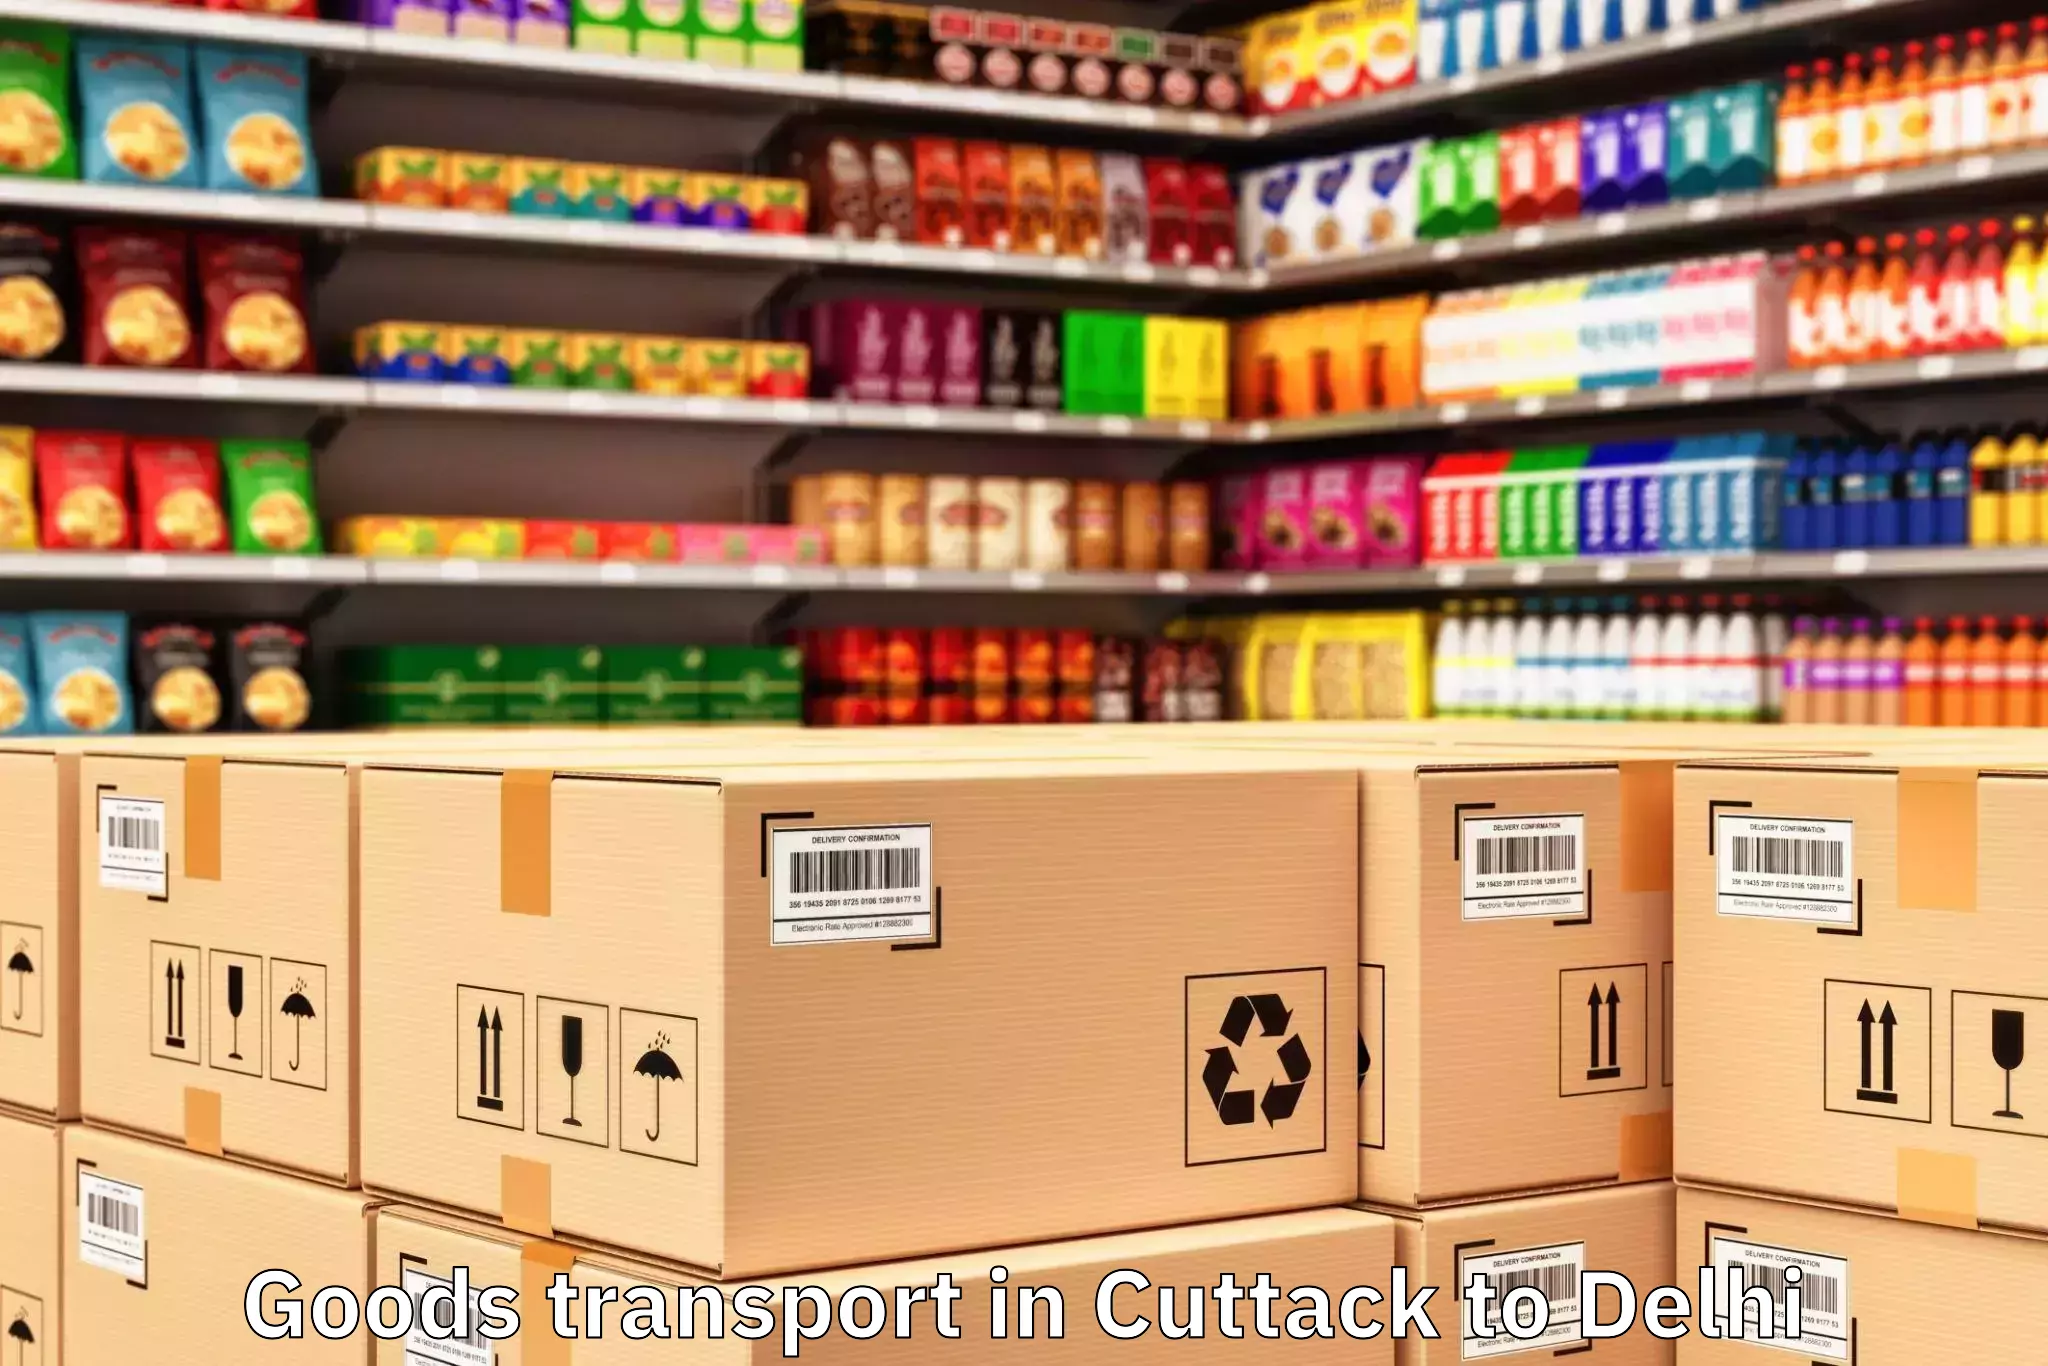 Quality Cuttack to Ansal Crown Plaza Mall Goods Transport